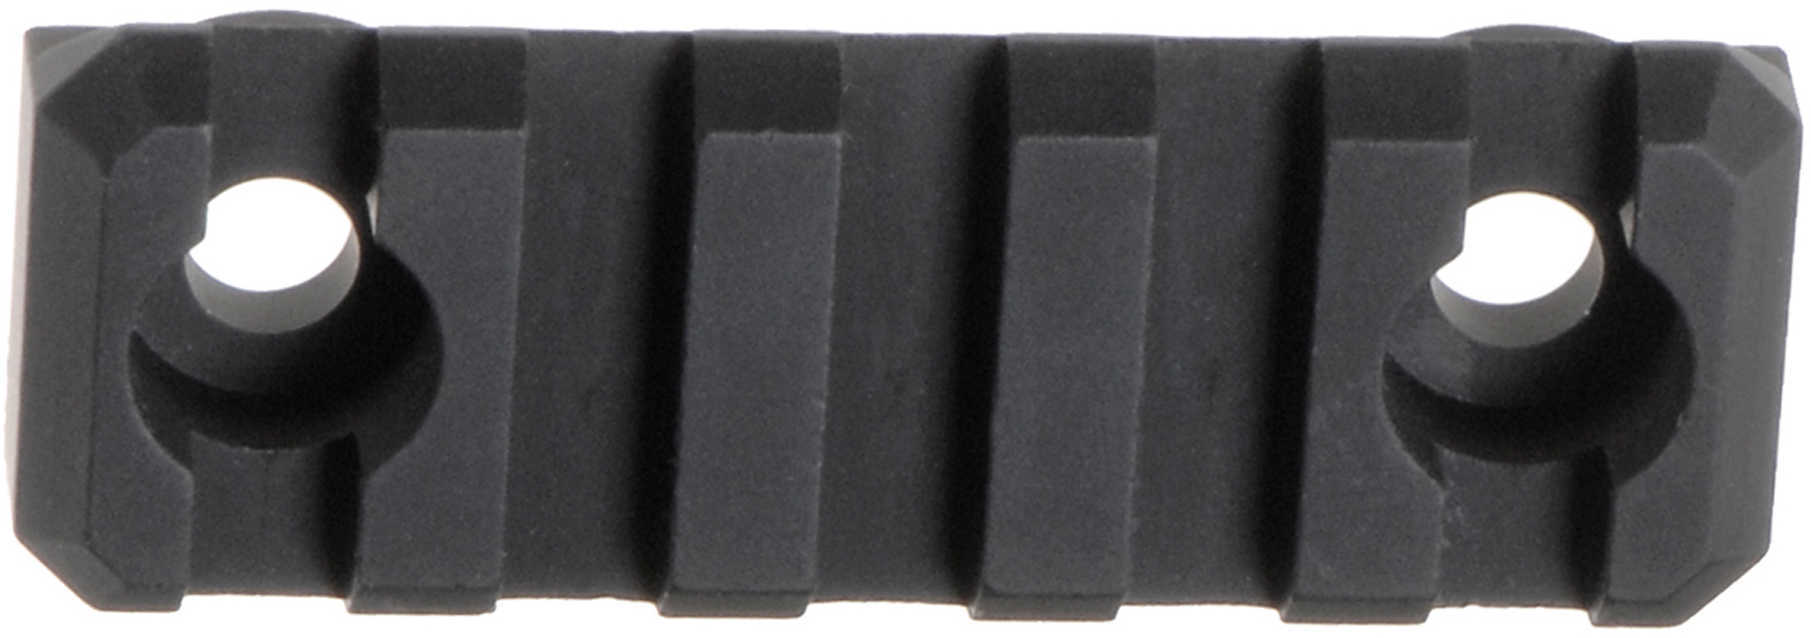 Troy Rail Section 2" Black Quick-Attach